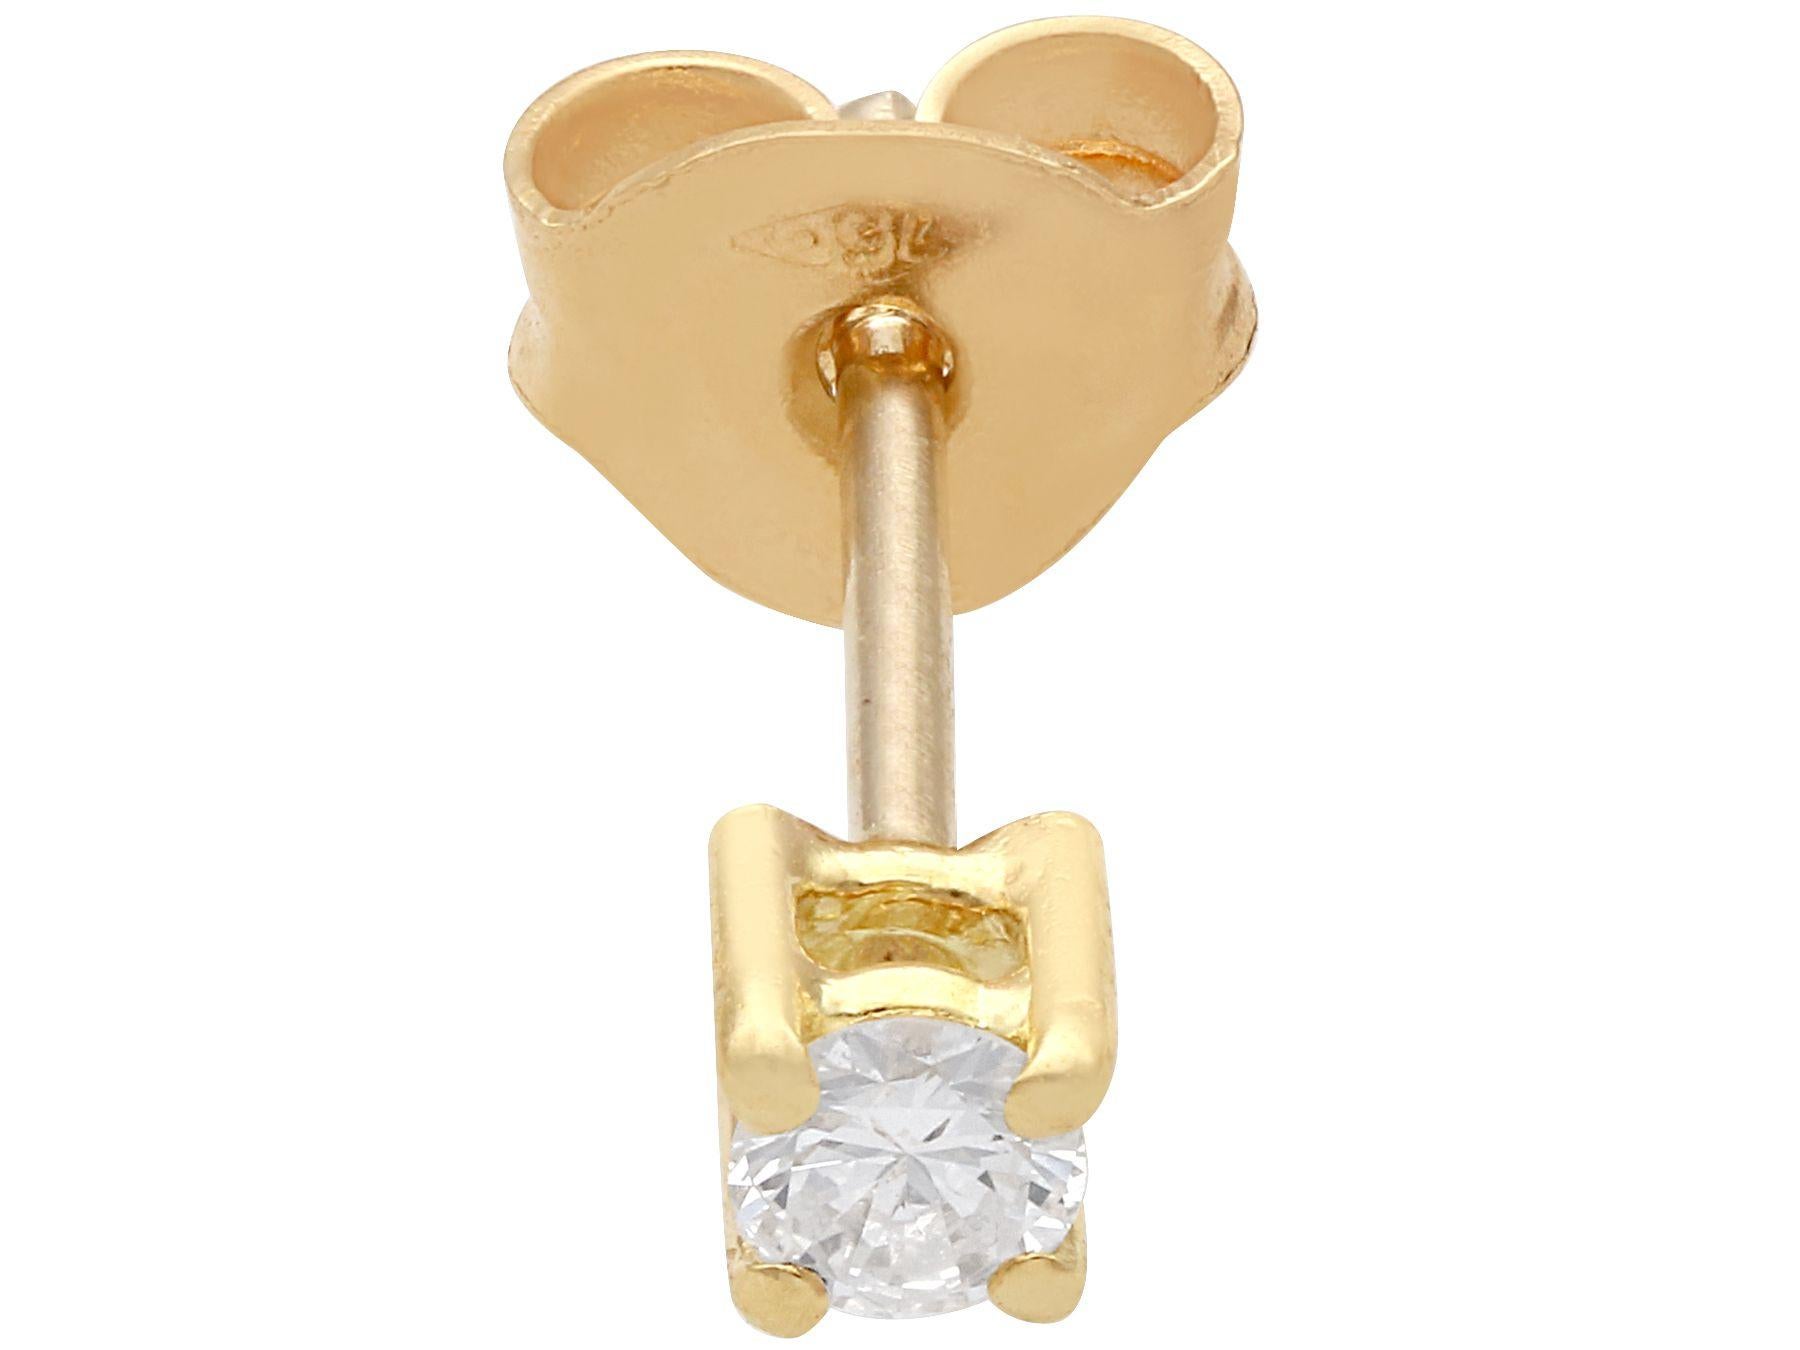 A fine and impressive pair of vintage 0.16 carat diamond and 18 karat yellow gold stud earrings; part of our diverse diamond jewellery collections

These fine and impressive diamond stud earrings have been crafted in 18k yellow gold.

The earrings